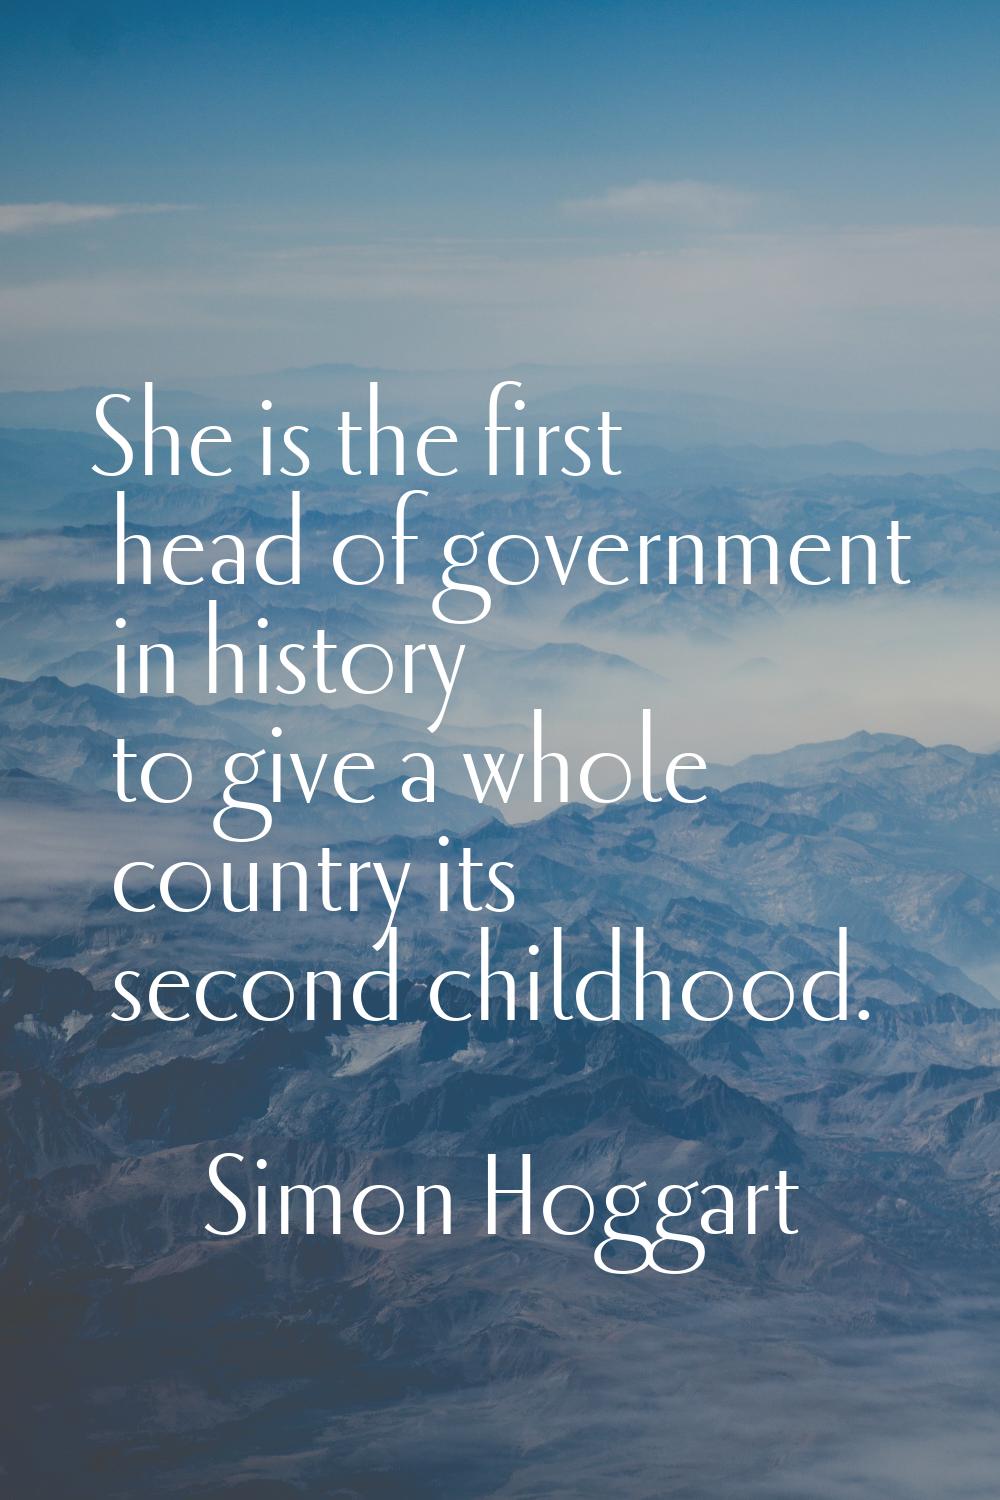 She is the first head of government in history to give a whole country its second childhood.